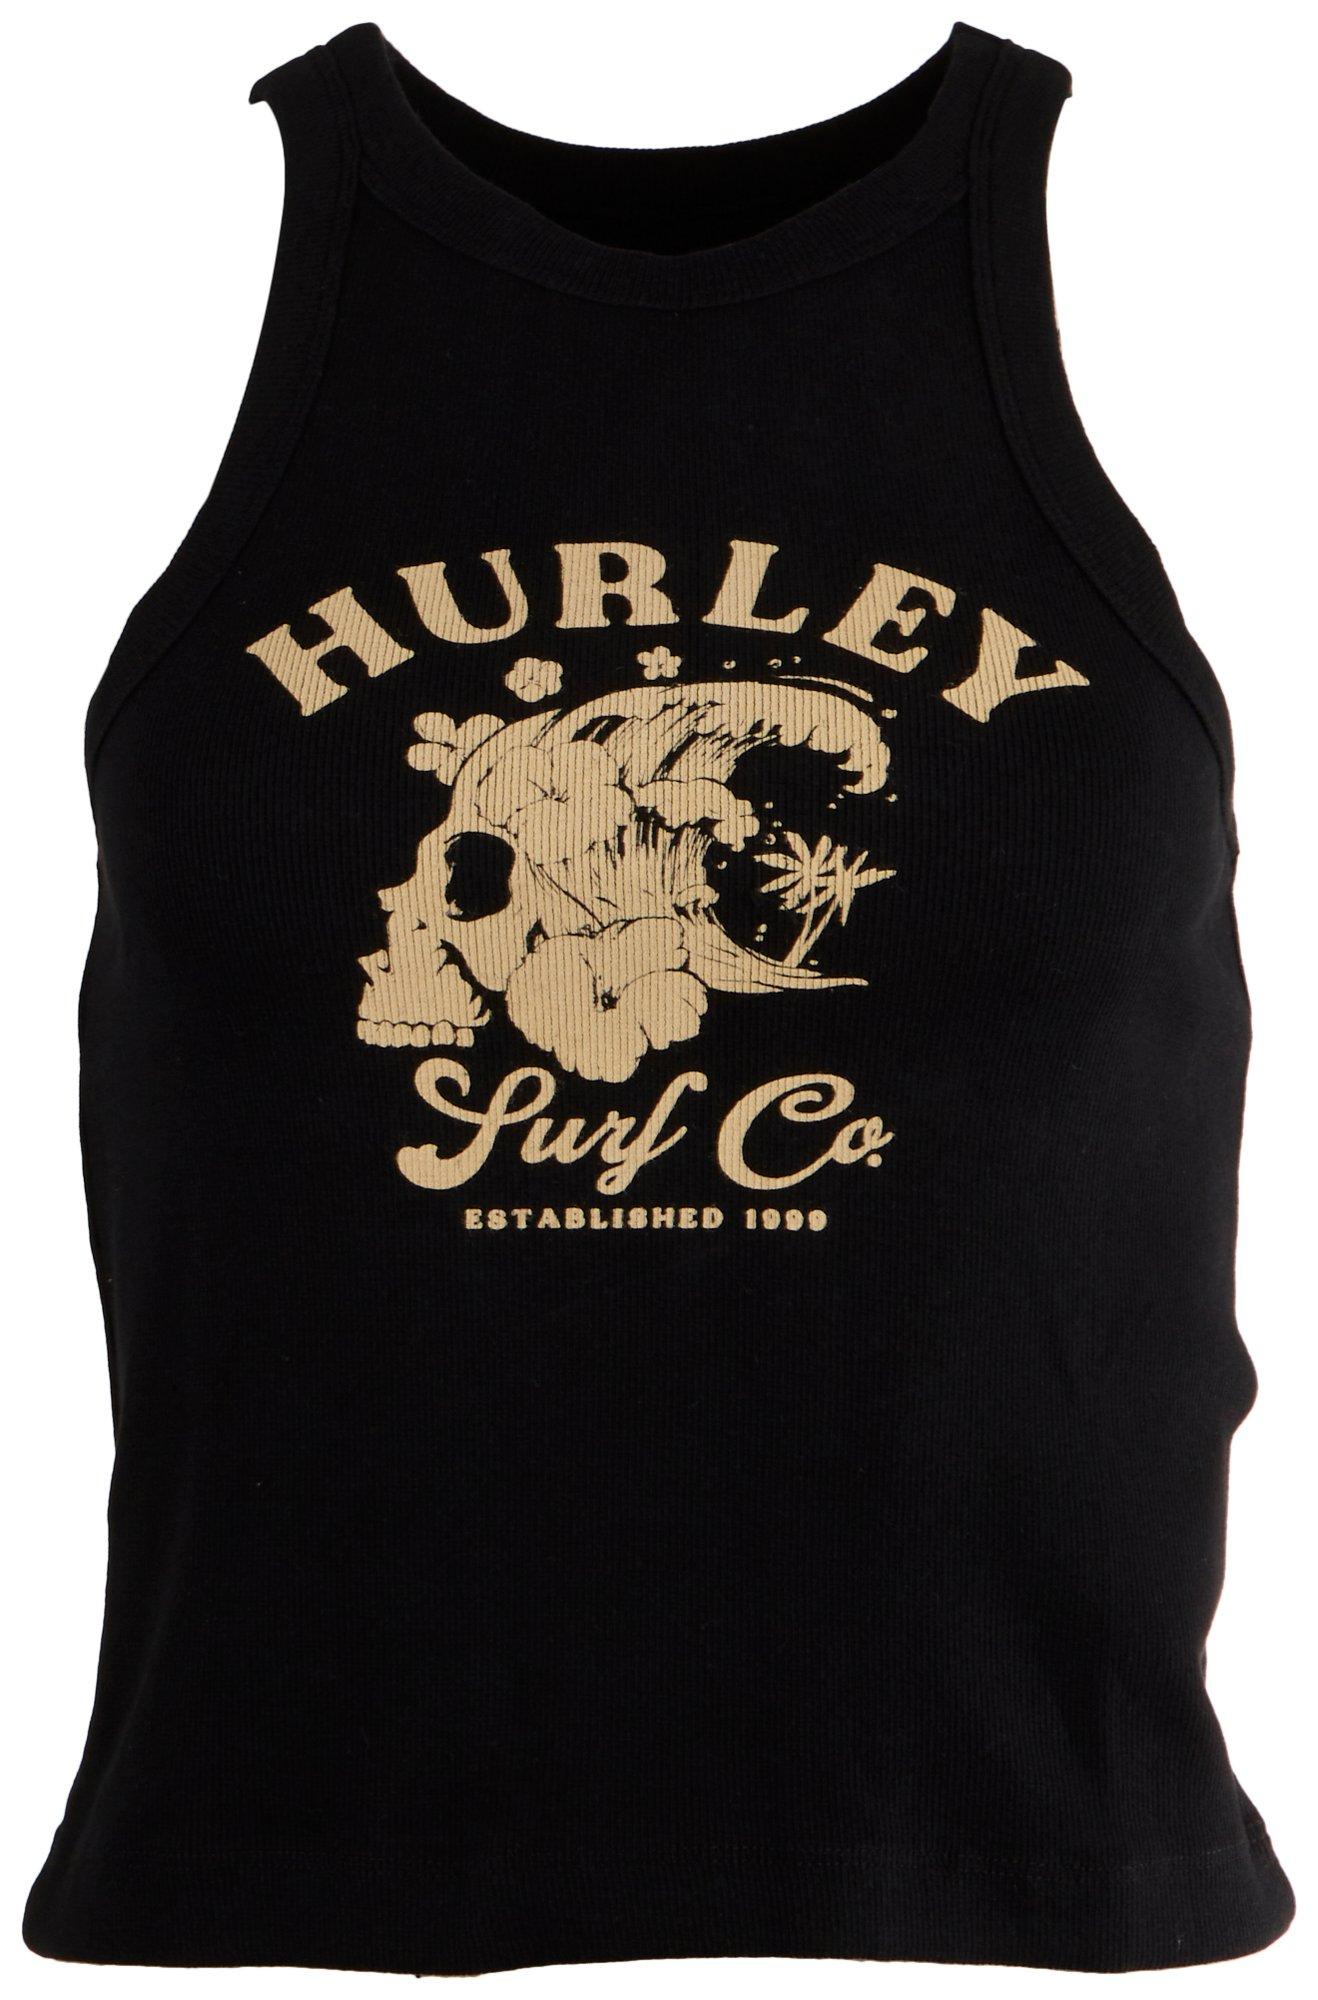 Hurley Juniors Only a Dream Tank Top